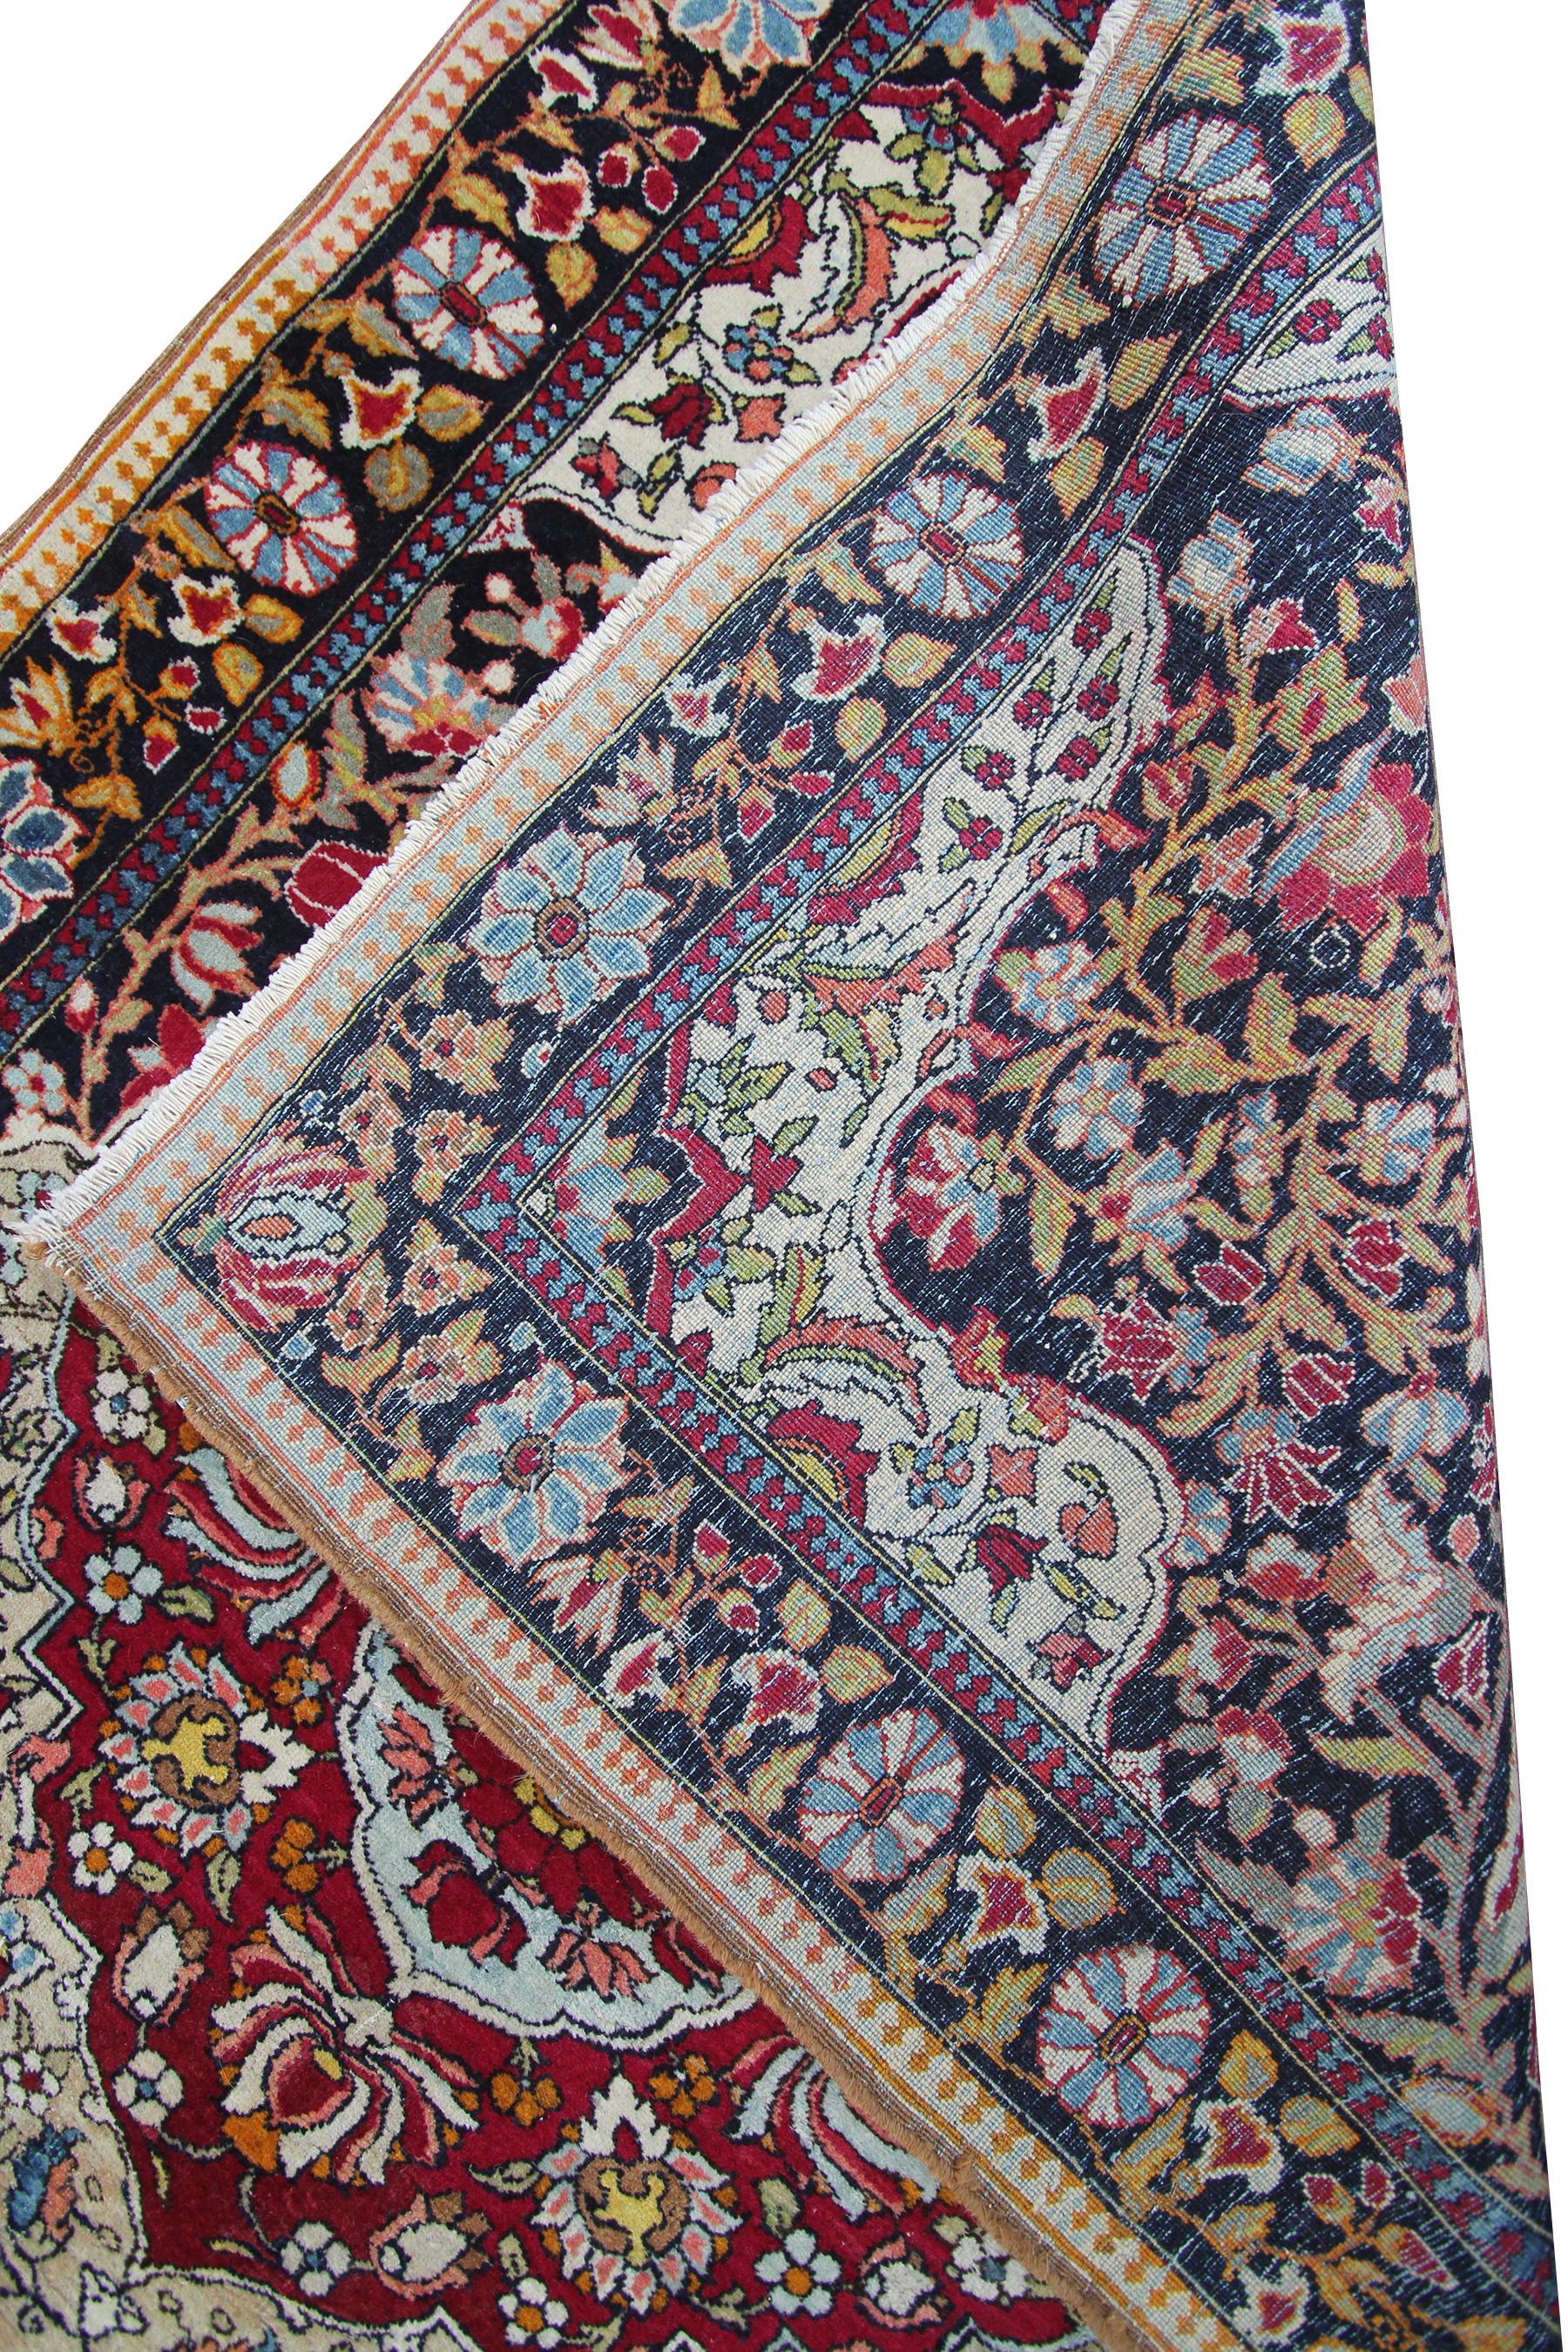 Black High Quality Antique Persian Isfahan Rug Artisan Work 4x5 107x153cm For Sale 2